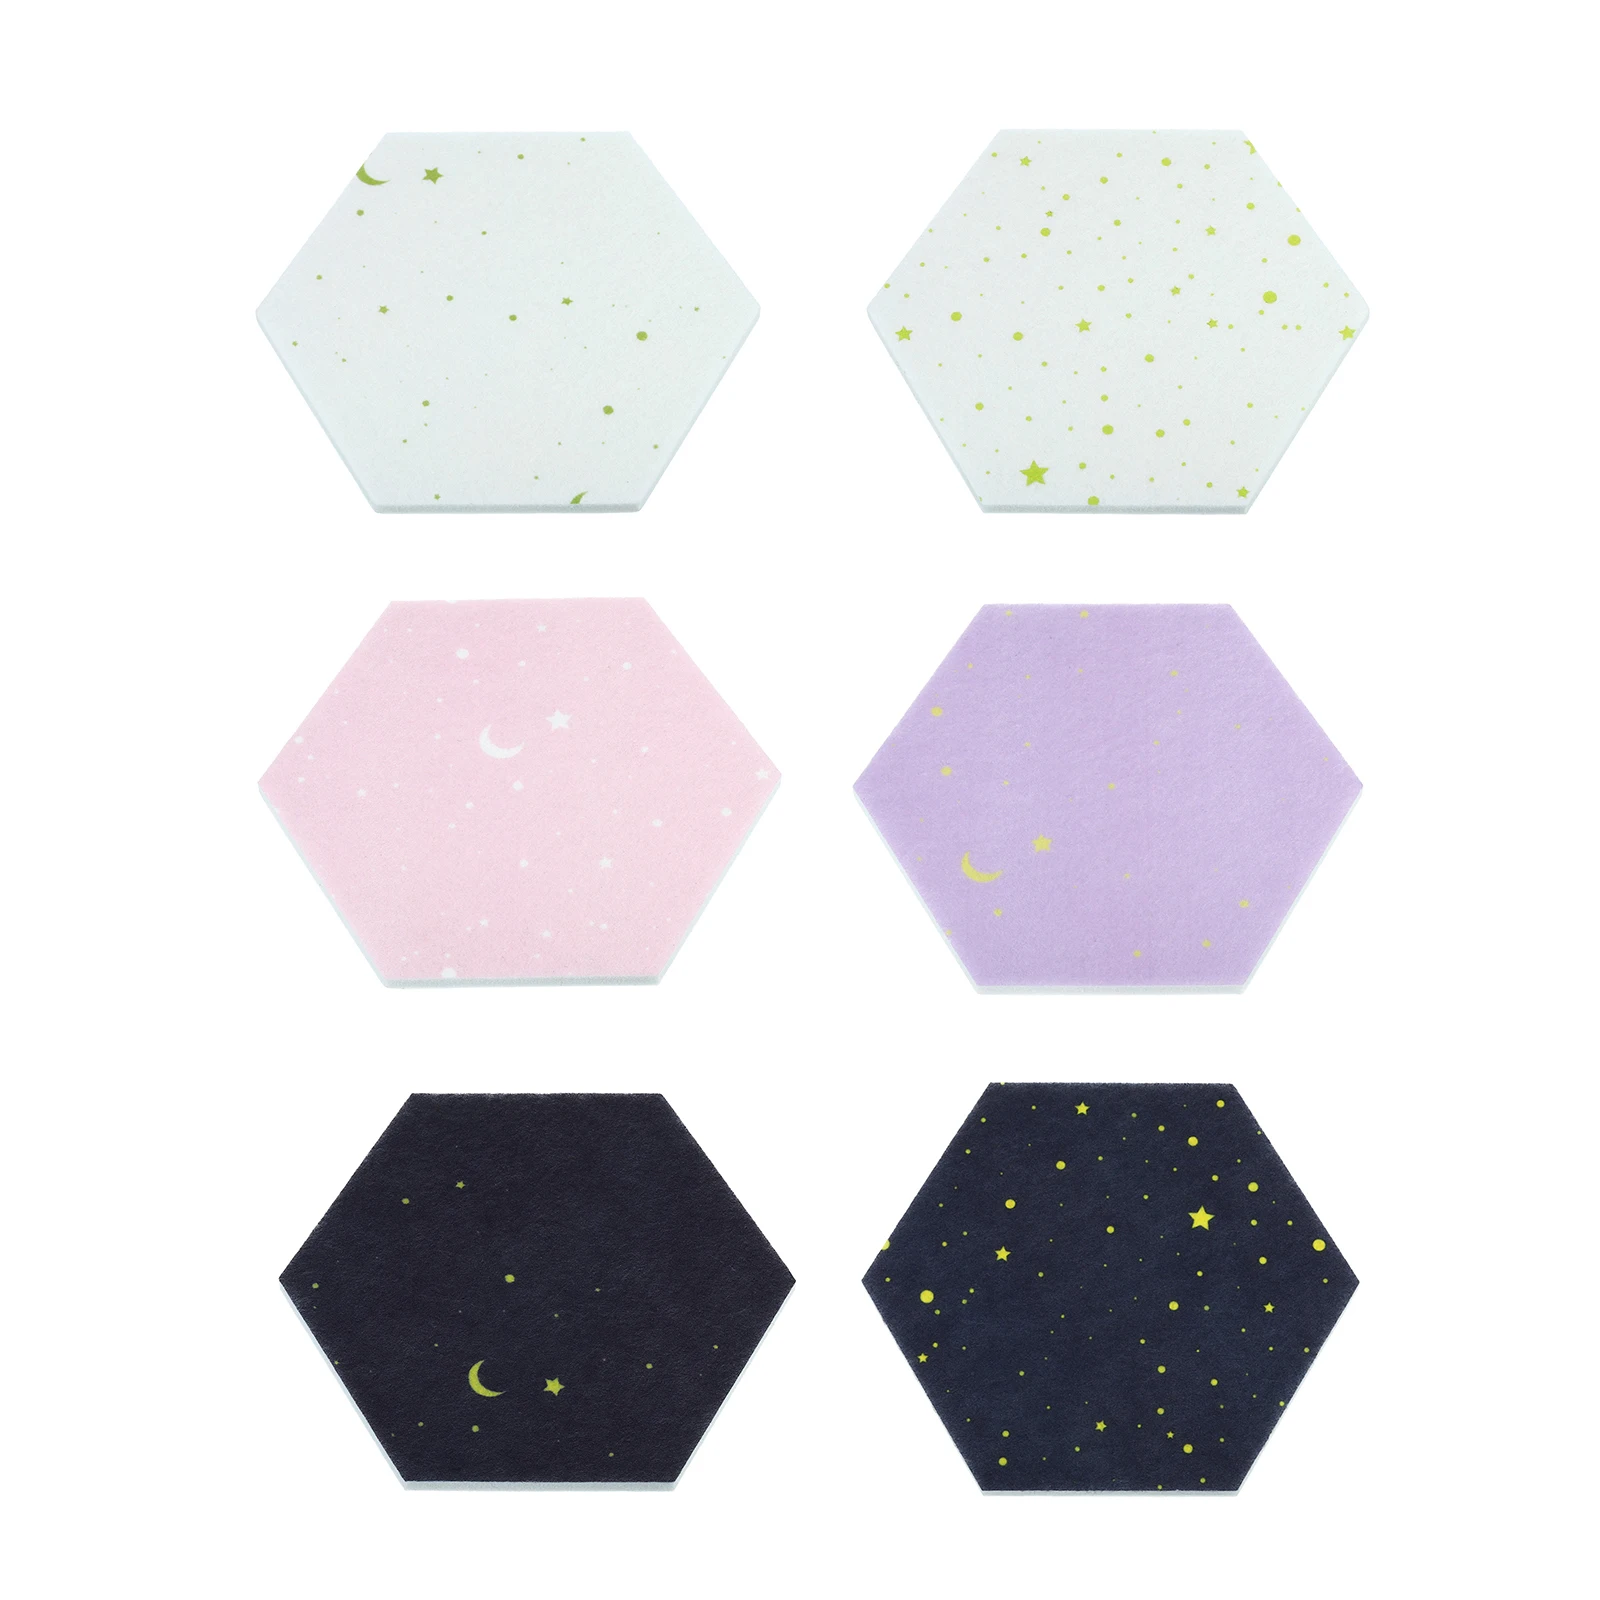 4Pcs Hexagon Felt Board Tile Bulletin Notice Cork Self Adhesive Pin Board Message Room Wall Decor Sticky Notes Photo Display message pin cork board backing pinnwand welcome mood wooden board with bracket multifunction photo wall creative wall decoration